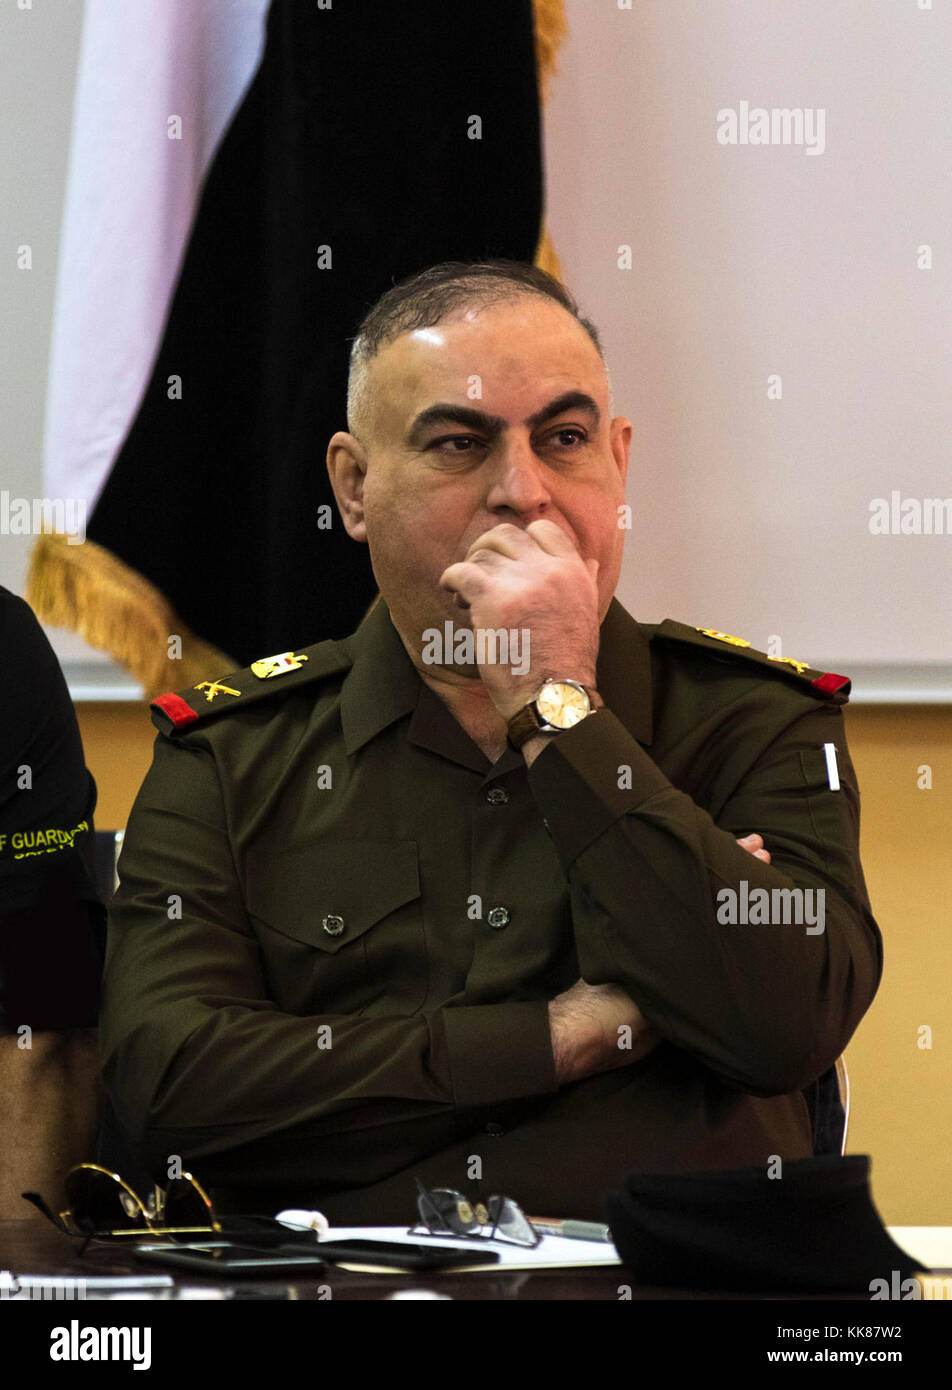 CAMP TAJI, Iraq (Nov. 7, 2017) – Staff Maj. Gen. Hassan Hillel Al-Maliki, director of Iraqi maintenance with the Iraqi forces, contemplates the ideas and discussions at logistics symposium. Iraqi and U.S. forces met and discussed upcoming operations by sharing intelligence, developing security strategies and targeting plans. The symposium promotes interoperability between the countries. (U.S. Army photo by Sgt. Jaccob Hearn) Stock Photo